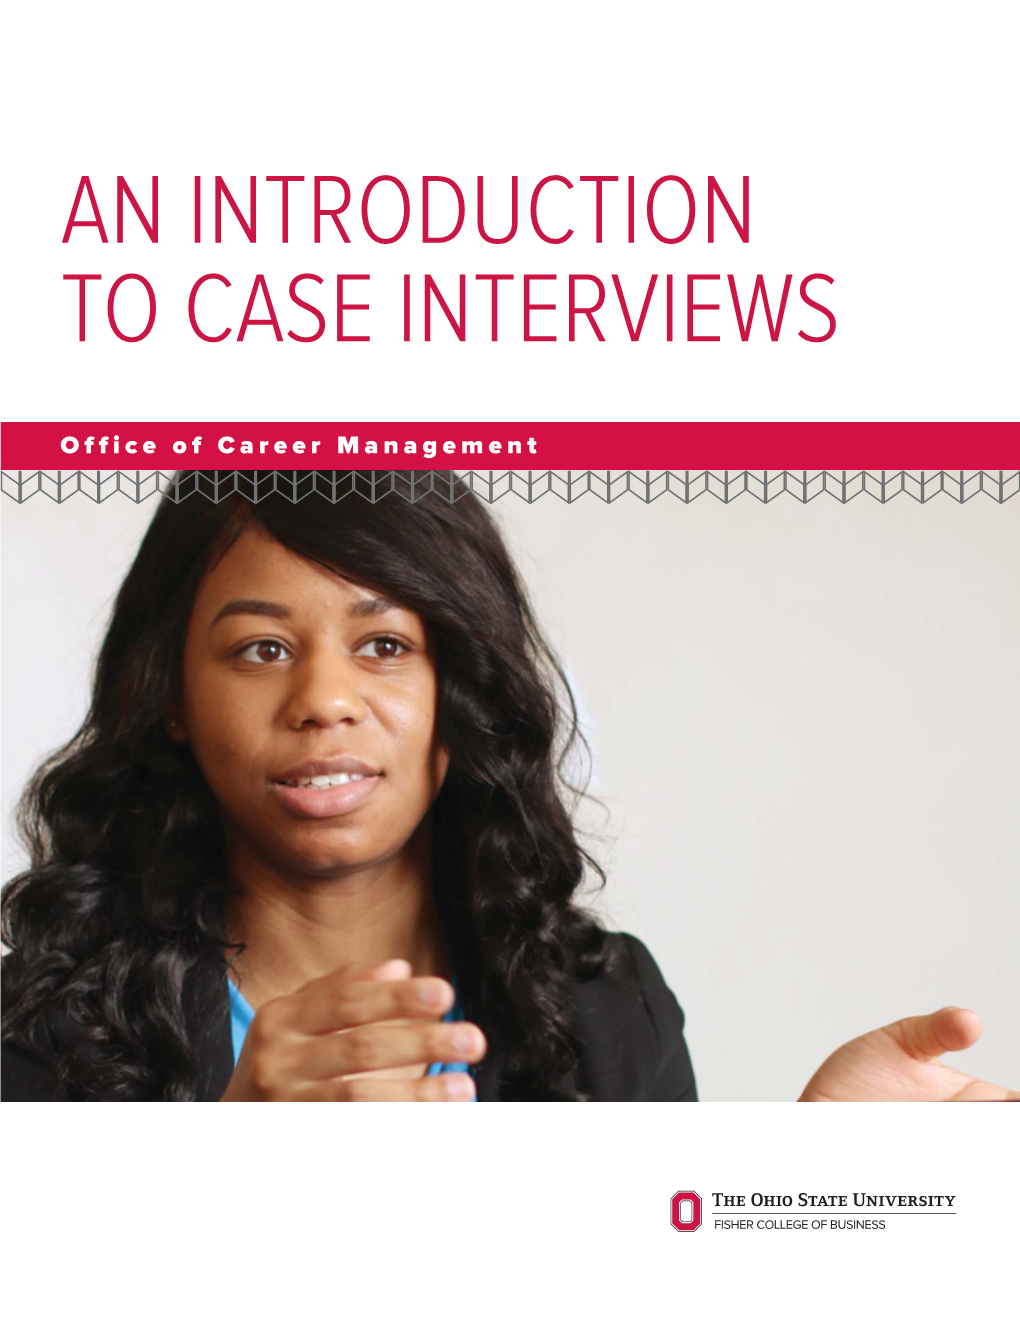 An Introduction to Case Interviews